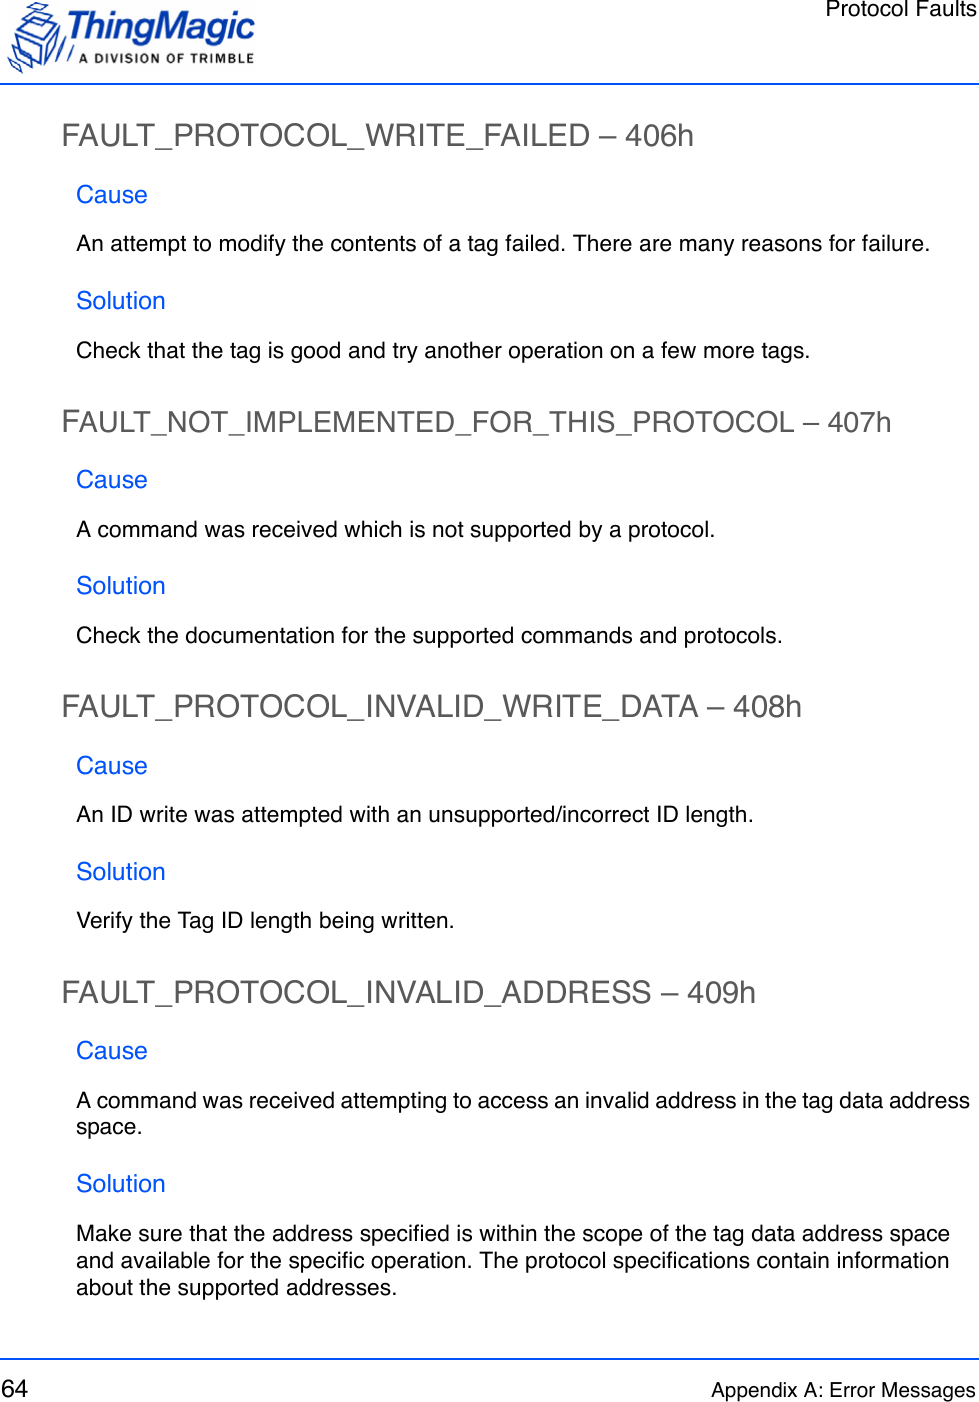 Protocol Faults64 Appendix A: Error MessagesFAULT_PROTOCOL_WRITE_FAILED – 406hCauseAn attempt to modify the contents of a tag failed. There are many reasons for failure.SolutionCheck that the tag is good and try another operation on a few more tags.FAULT_NOT_IMPLEMENTED_FOR_THIS_PROTOCOL – 407hCauseA command was received which is not supported by a protocol.SolutionCheck the documentation for the supported commands and protocols.FAULT_PROTOCOL_INVALID_WRITE_DATA – 408hCauseAn ID write was attempted with an unsupported/incorrect ID length.SolutionVerify the Tag ID length being written.FAULT_PROTOCOL_INVALID_ADDRESS – 409hCauseA command was received attempting to access an invalid address in the tag data address space. SolutionMake sure that the address specified is within the scope of the tag data address space and available for the specific operation. The protocol specifications contain information about the supported addresses.